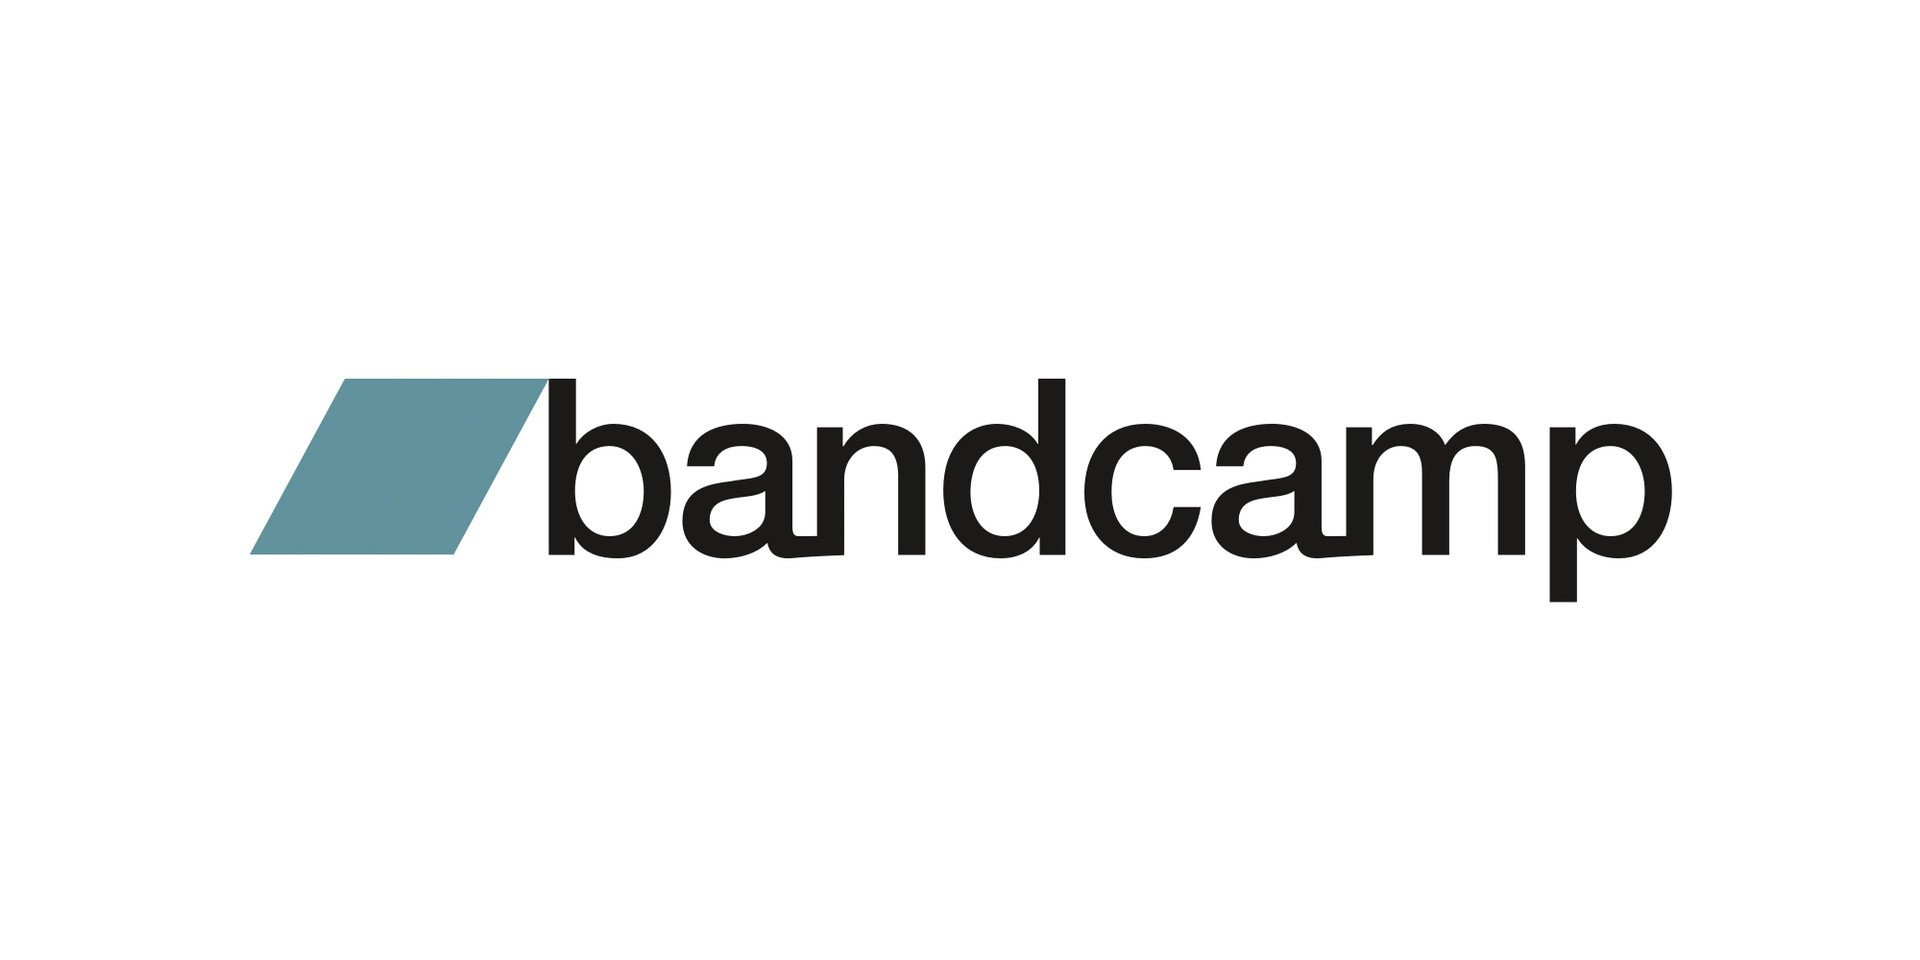 Bandcamp to donate revenue shares for "racial justice, equality, and change"